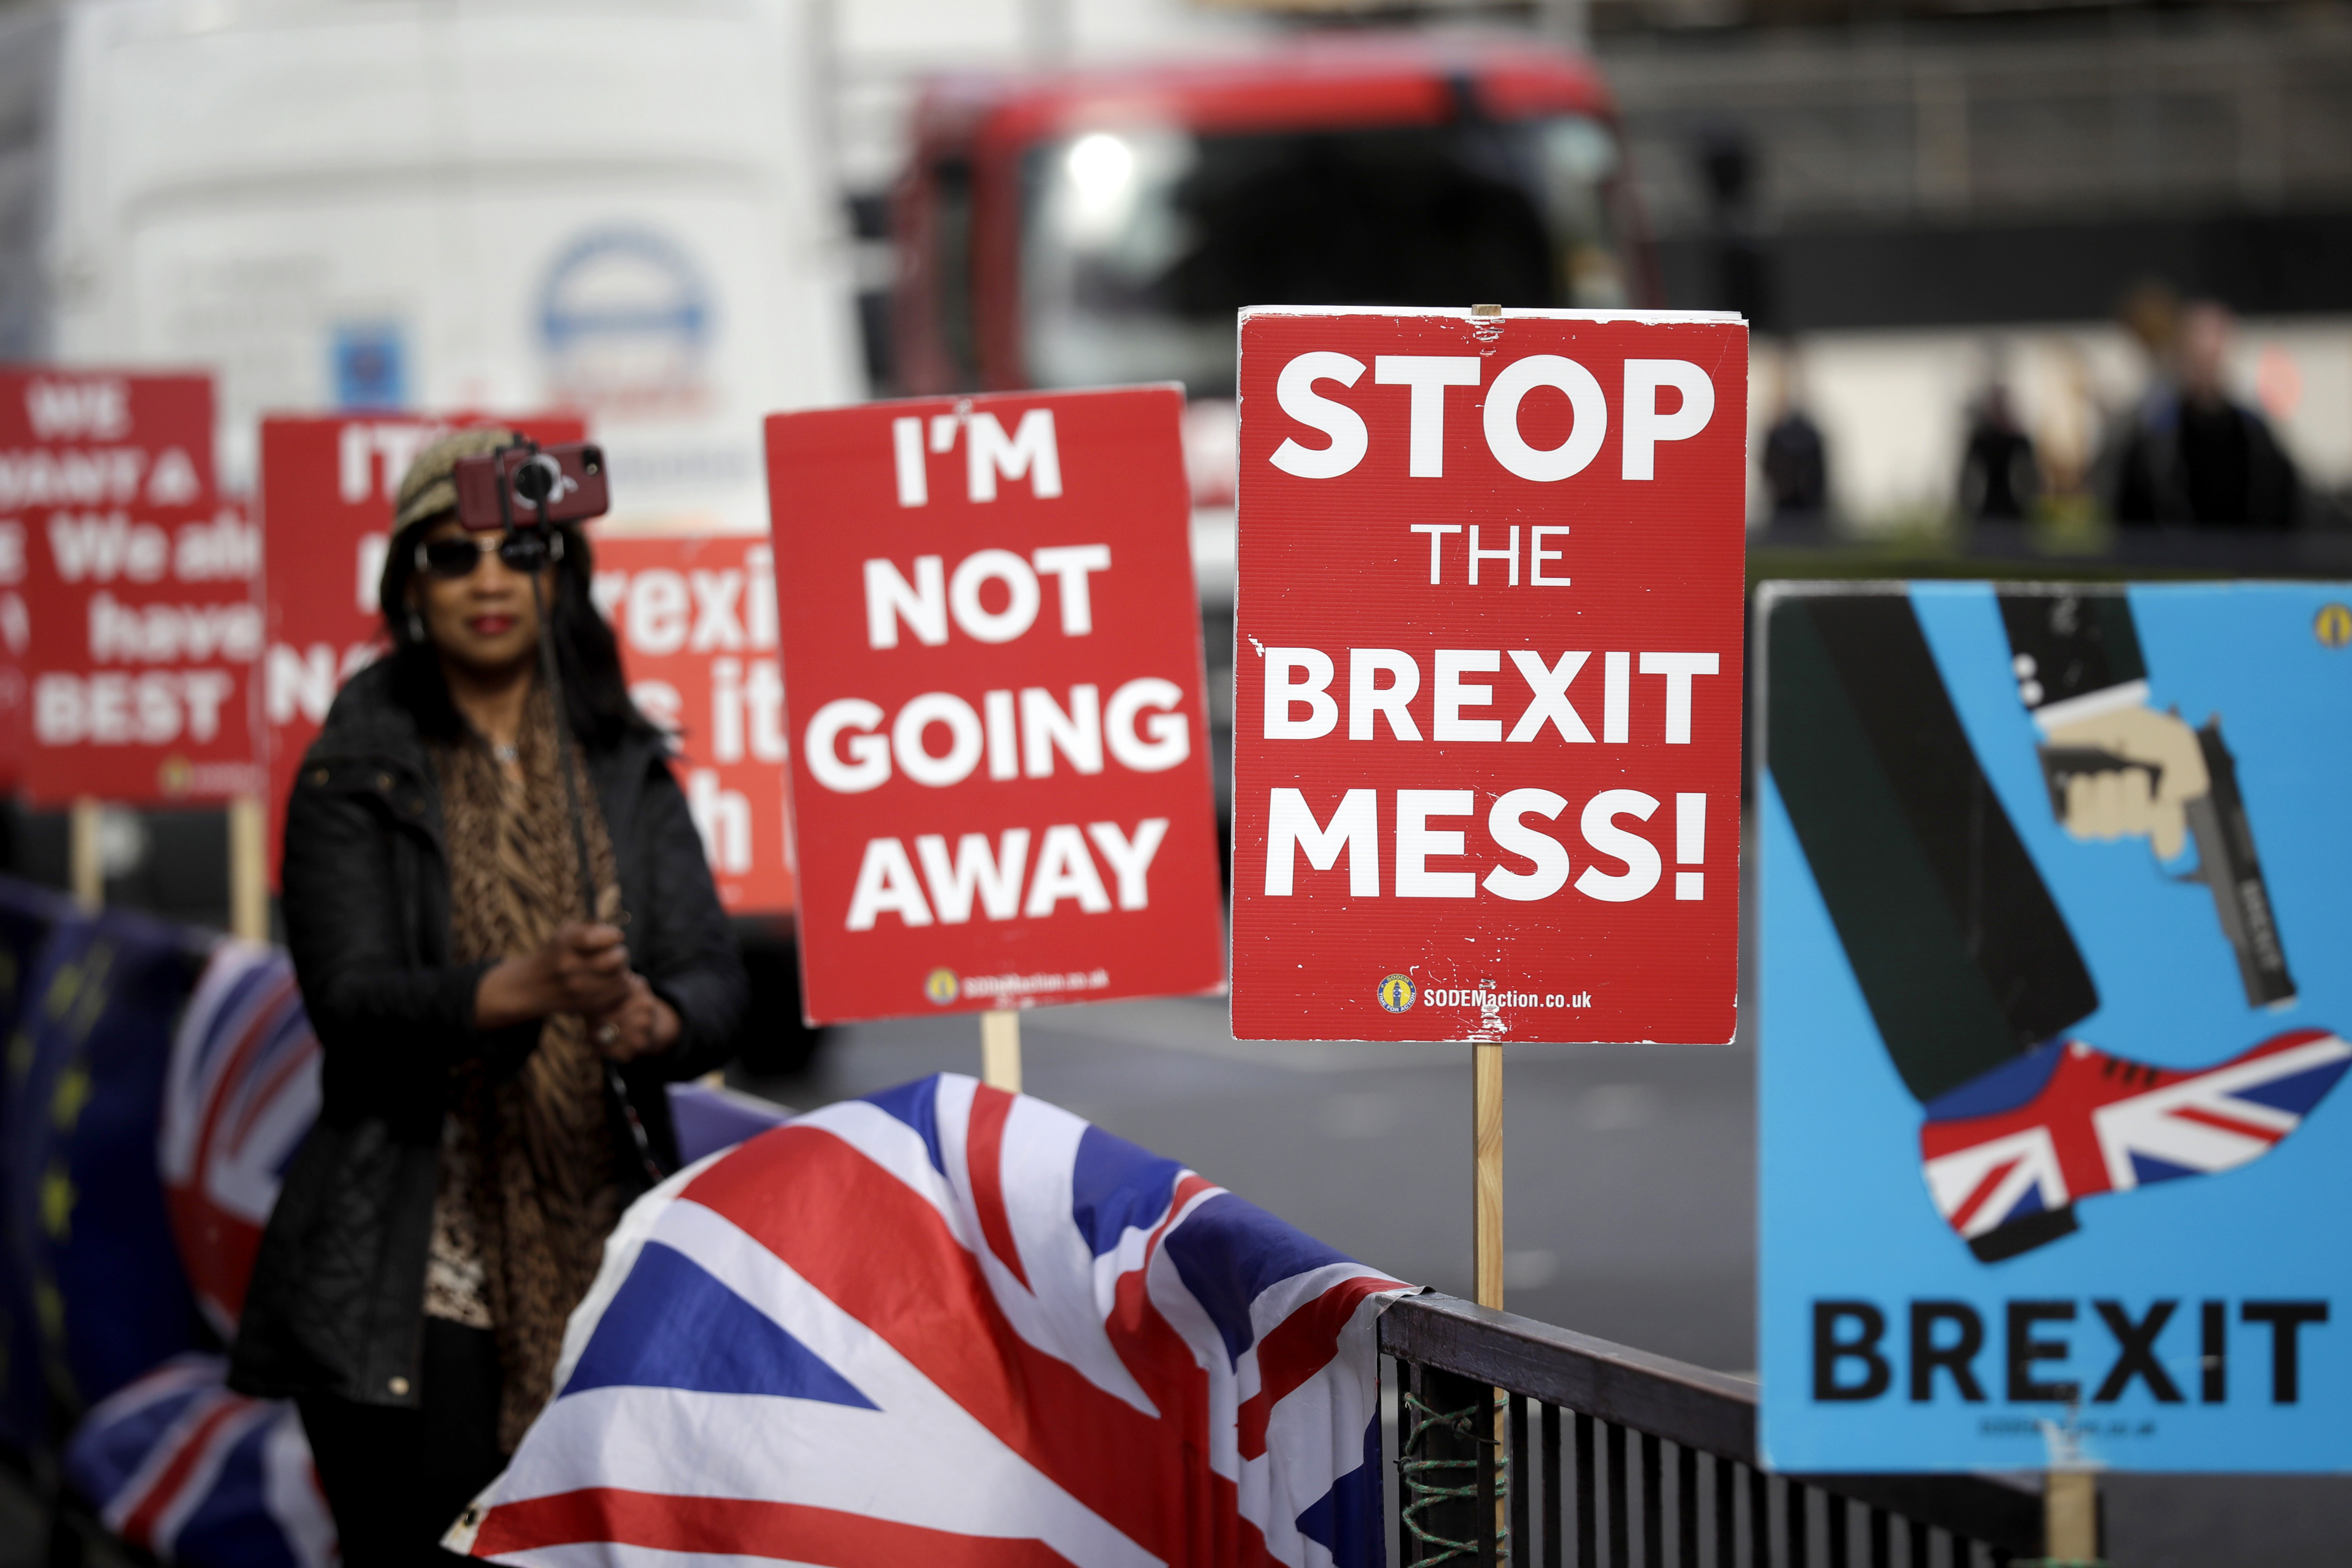 A tourist takes a selfie next to placards placed by anti-Brexit supporters stand opposite the Houses of Parliament in London, Monday, March 18, 2019. British Prime Minister Theresa May was making a last-minute push Monday to win support for her European Union divorce deal, warning opponents that failure to approve it would mean a long — and possibly indefinite — delay to Brexit. Parliament has rejected the agreement twice, but May aims to try a third time this week if she can persuade enough lawmakers to change their minds. (AP Photo/Matt Dunham)